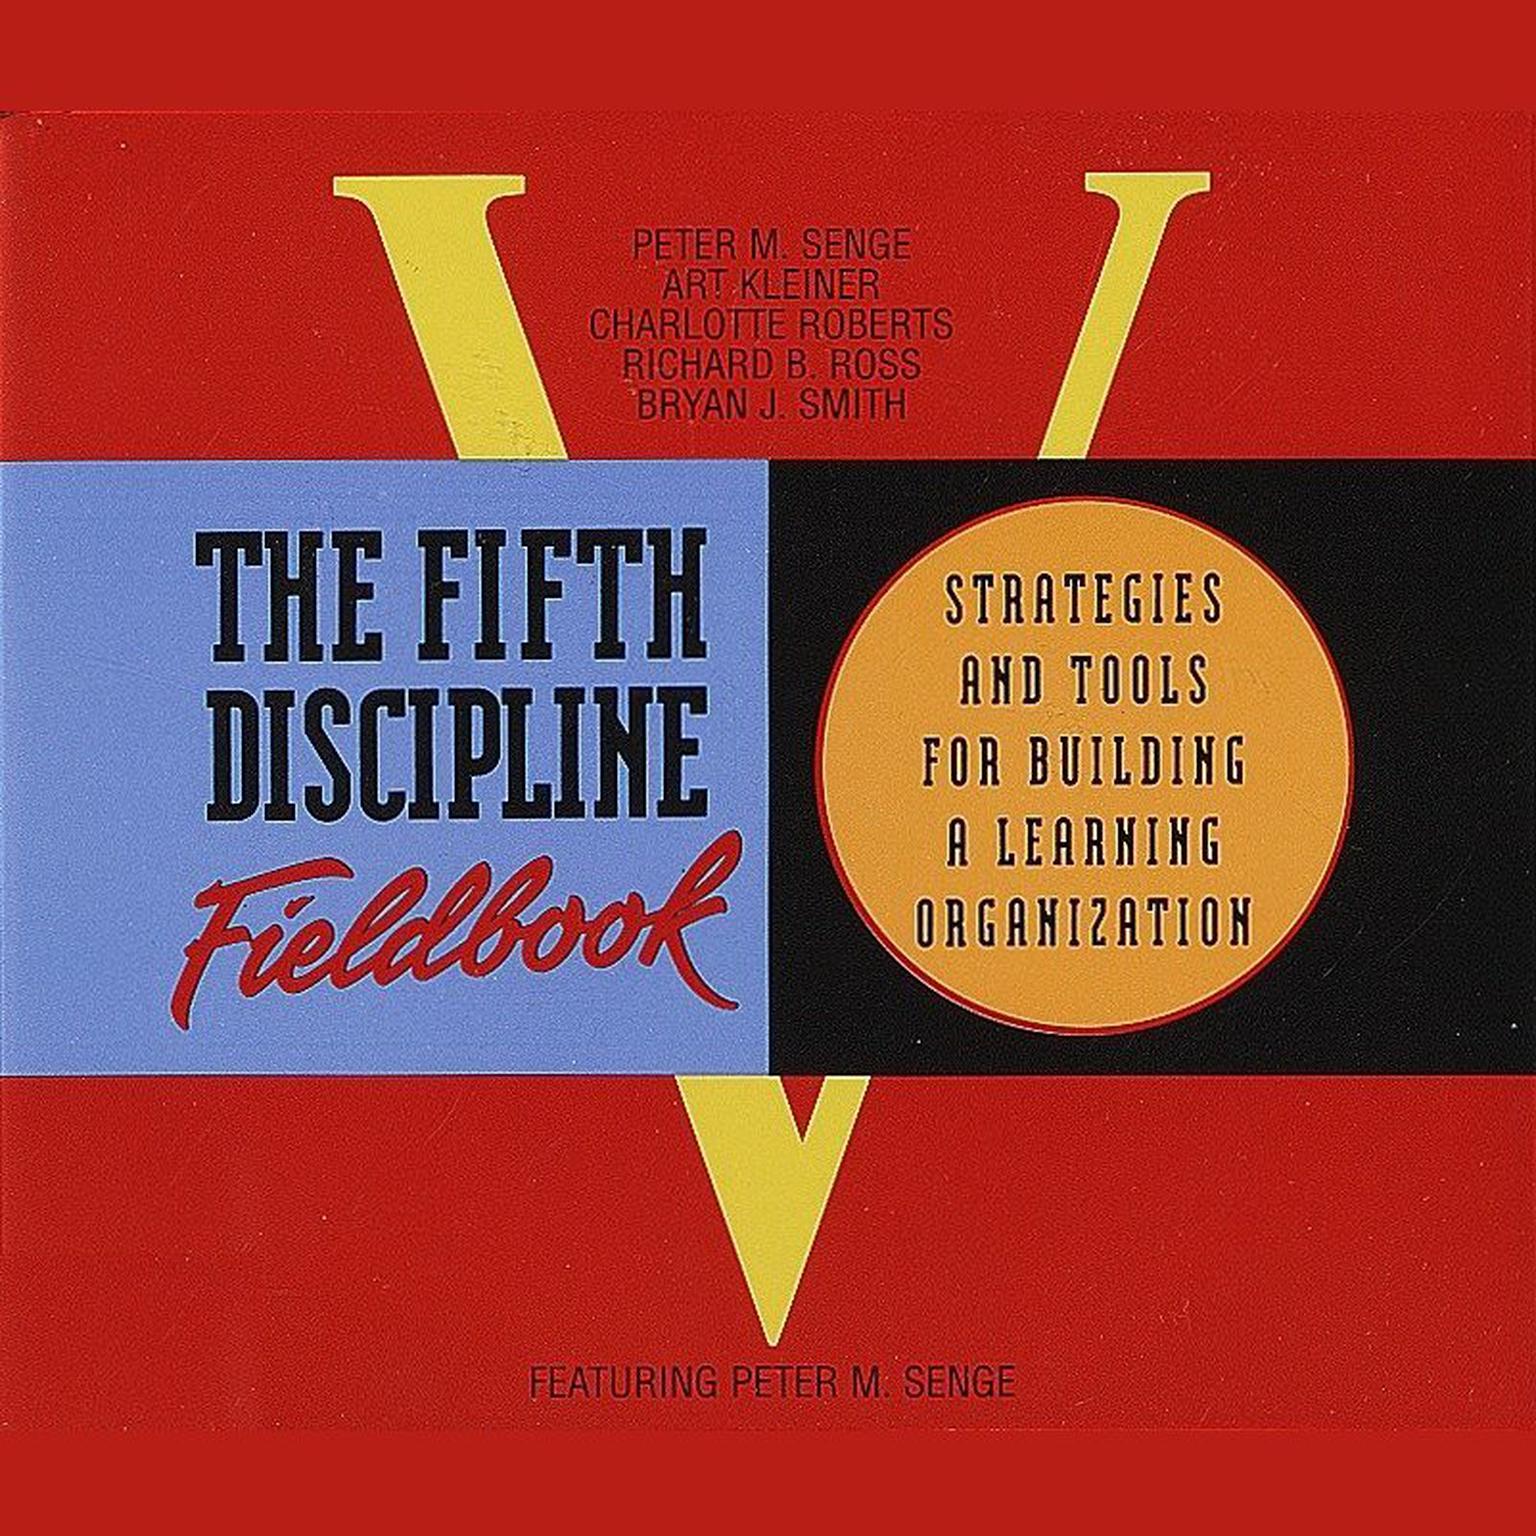 The Fifth Discipline Fieldbook (Abridged): Strategies and Tools for Building a Learning Organization Audiobook, by Peter M. Senge